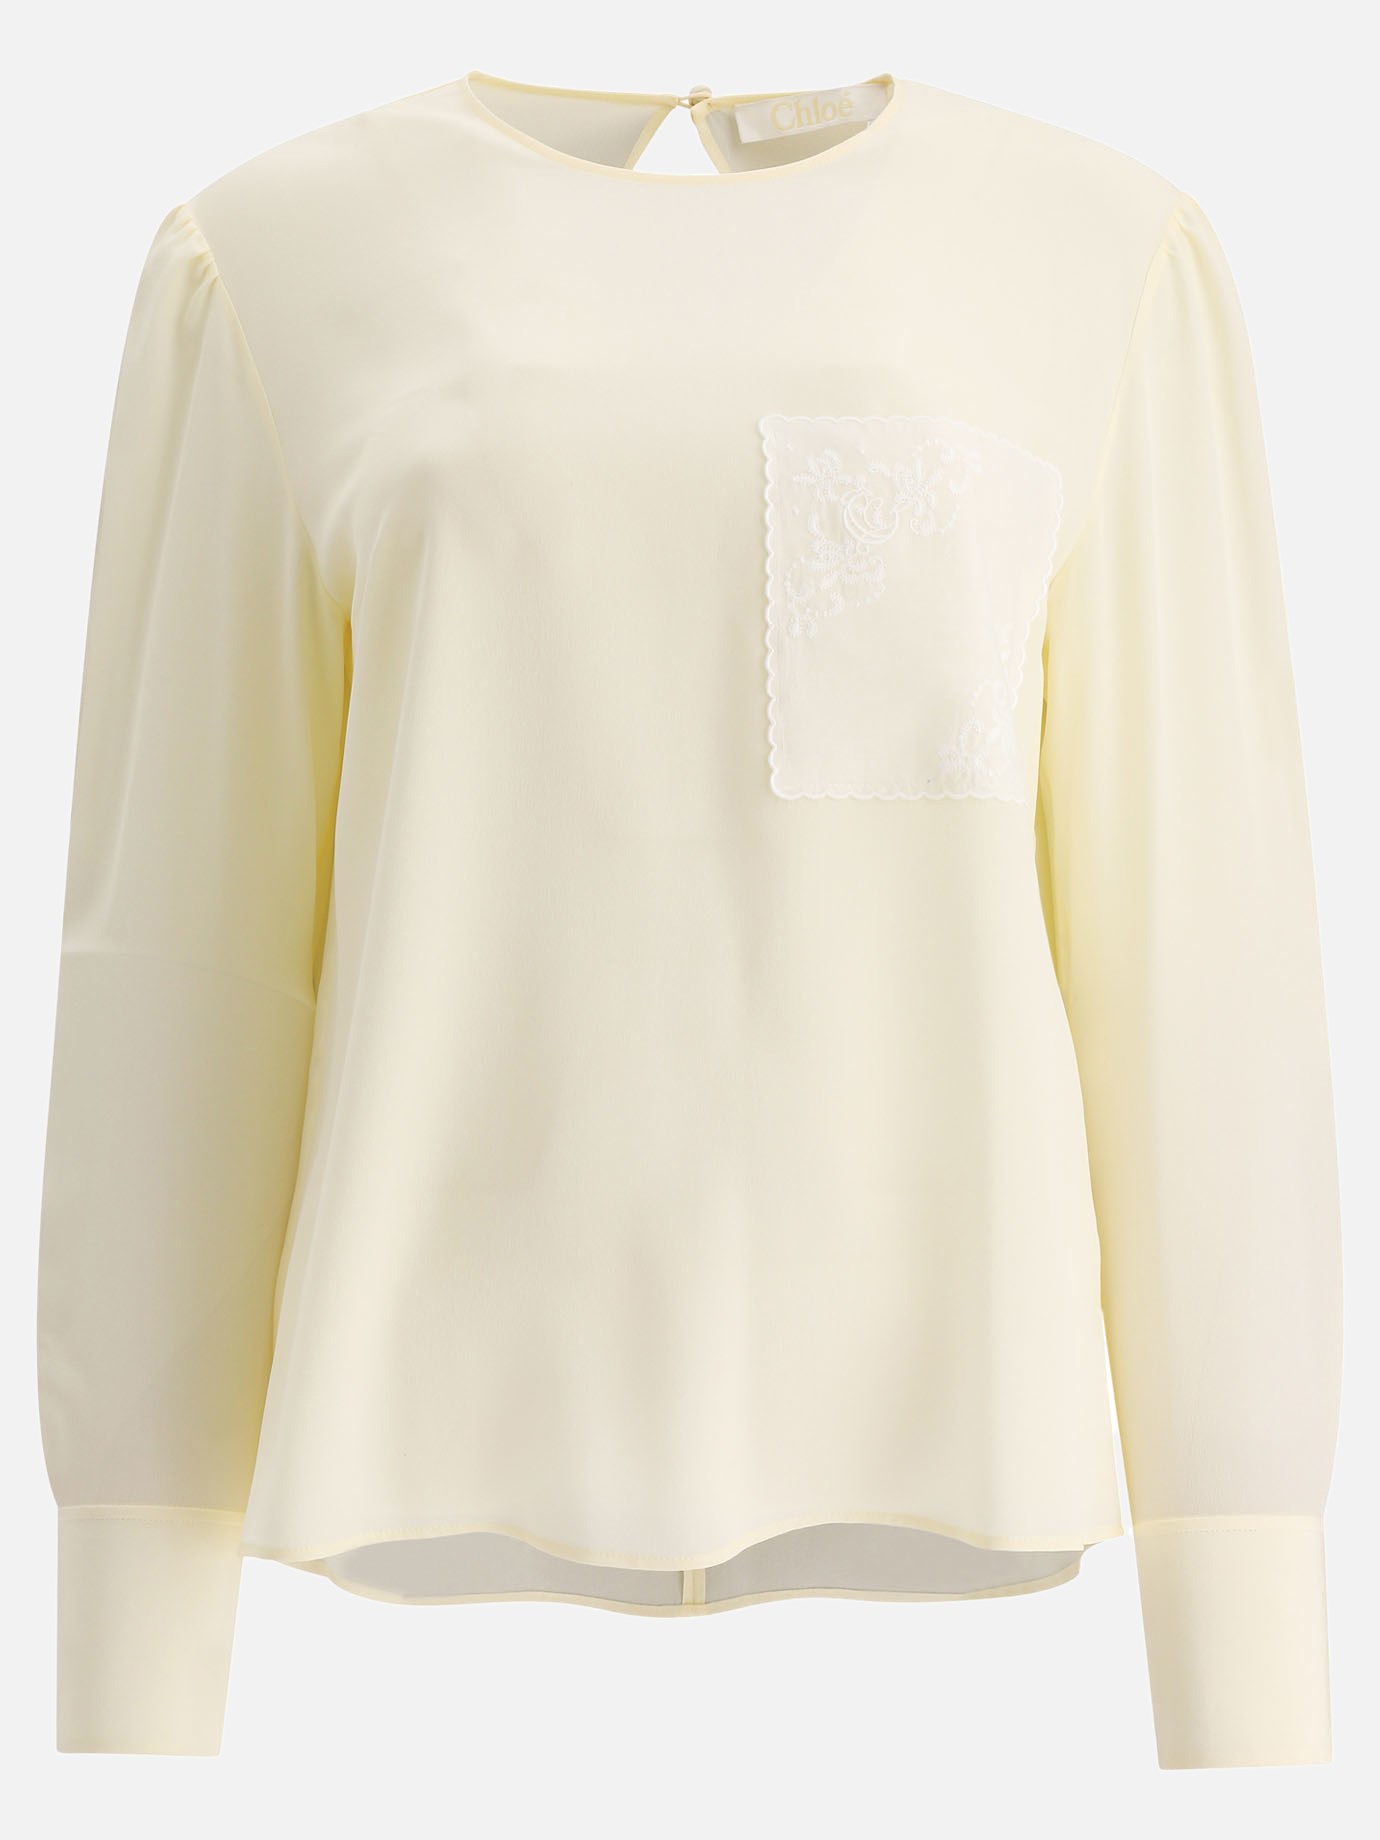 Blouse with embroidered pocket by Chloé